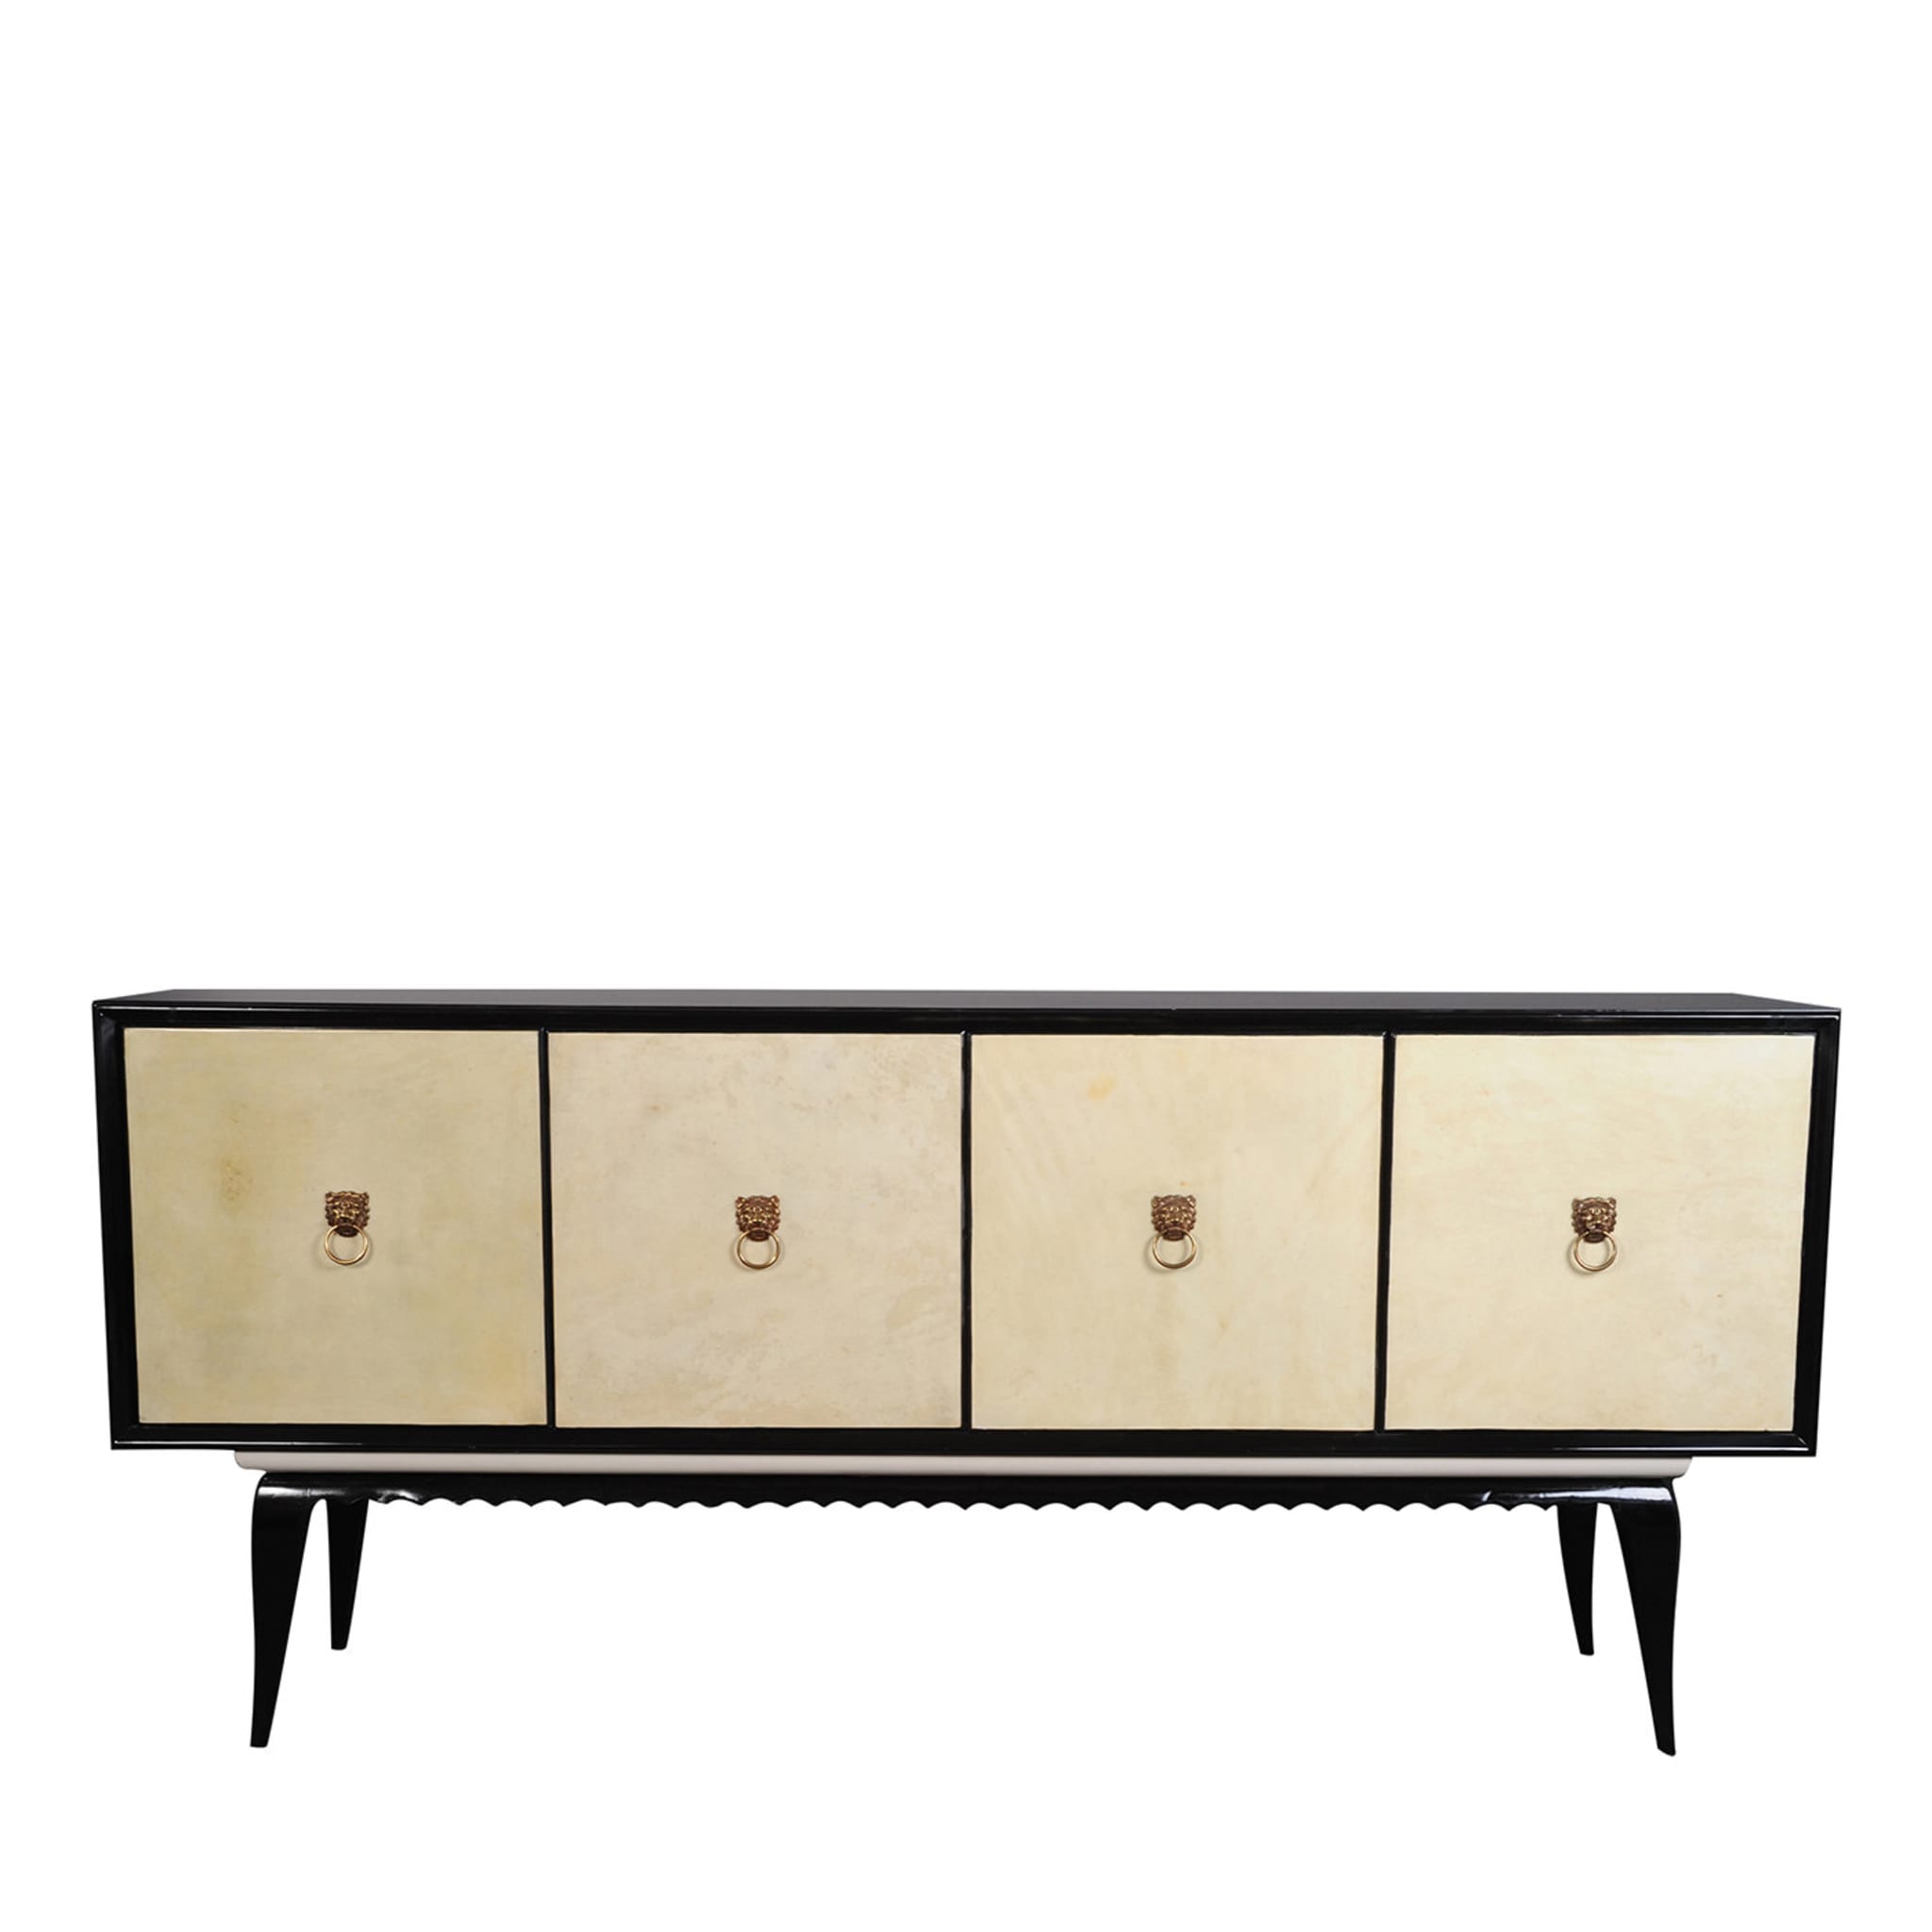 PLM-0004 Black and Ivory Parchment Sideboard - Main view